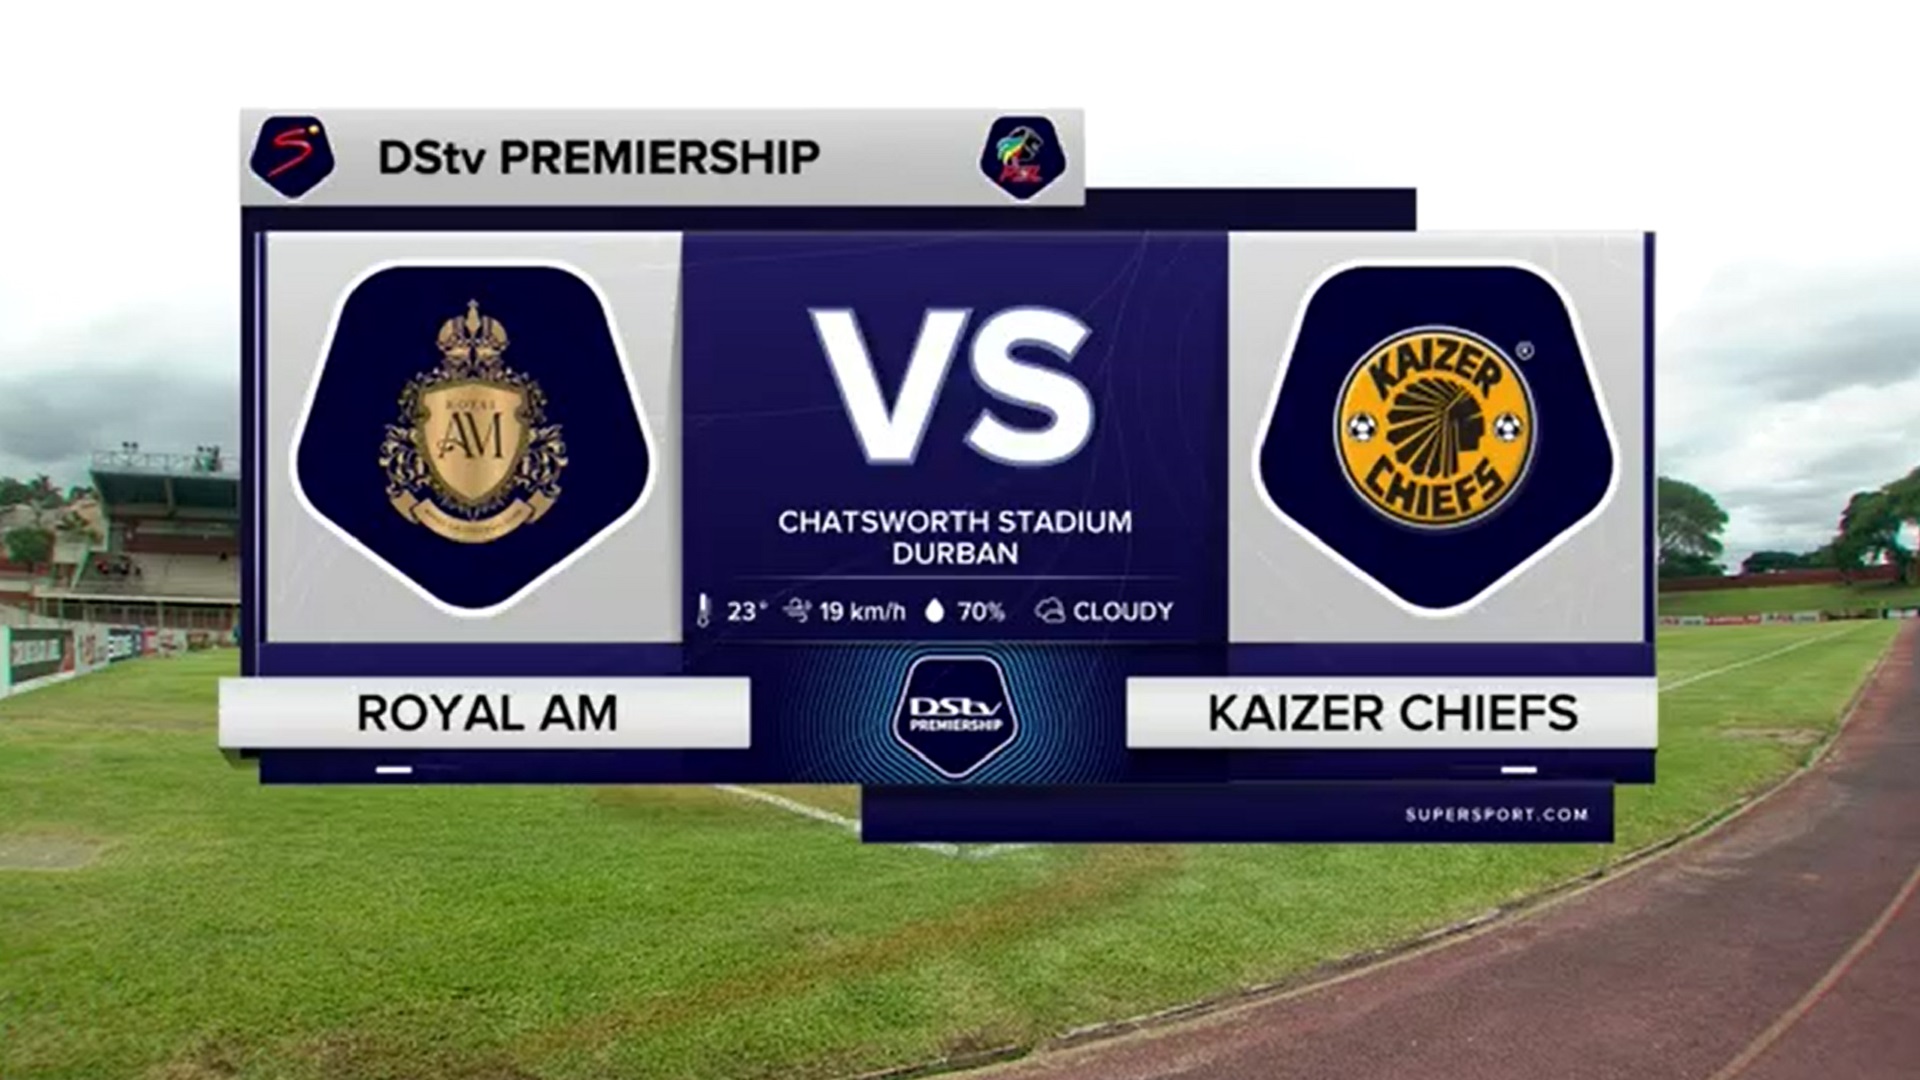 Highlights of the match between Royal AM and Kaizer Chiefs taking place at the Chatsworth Stadium